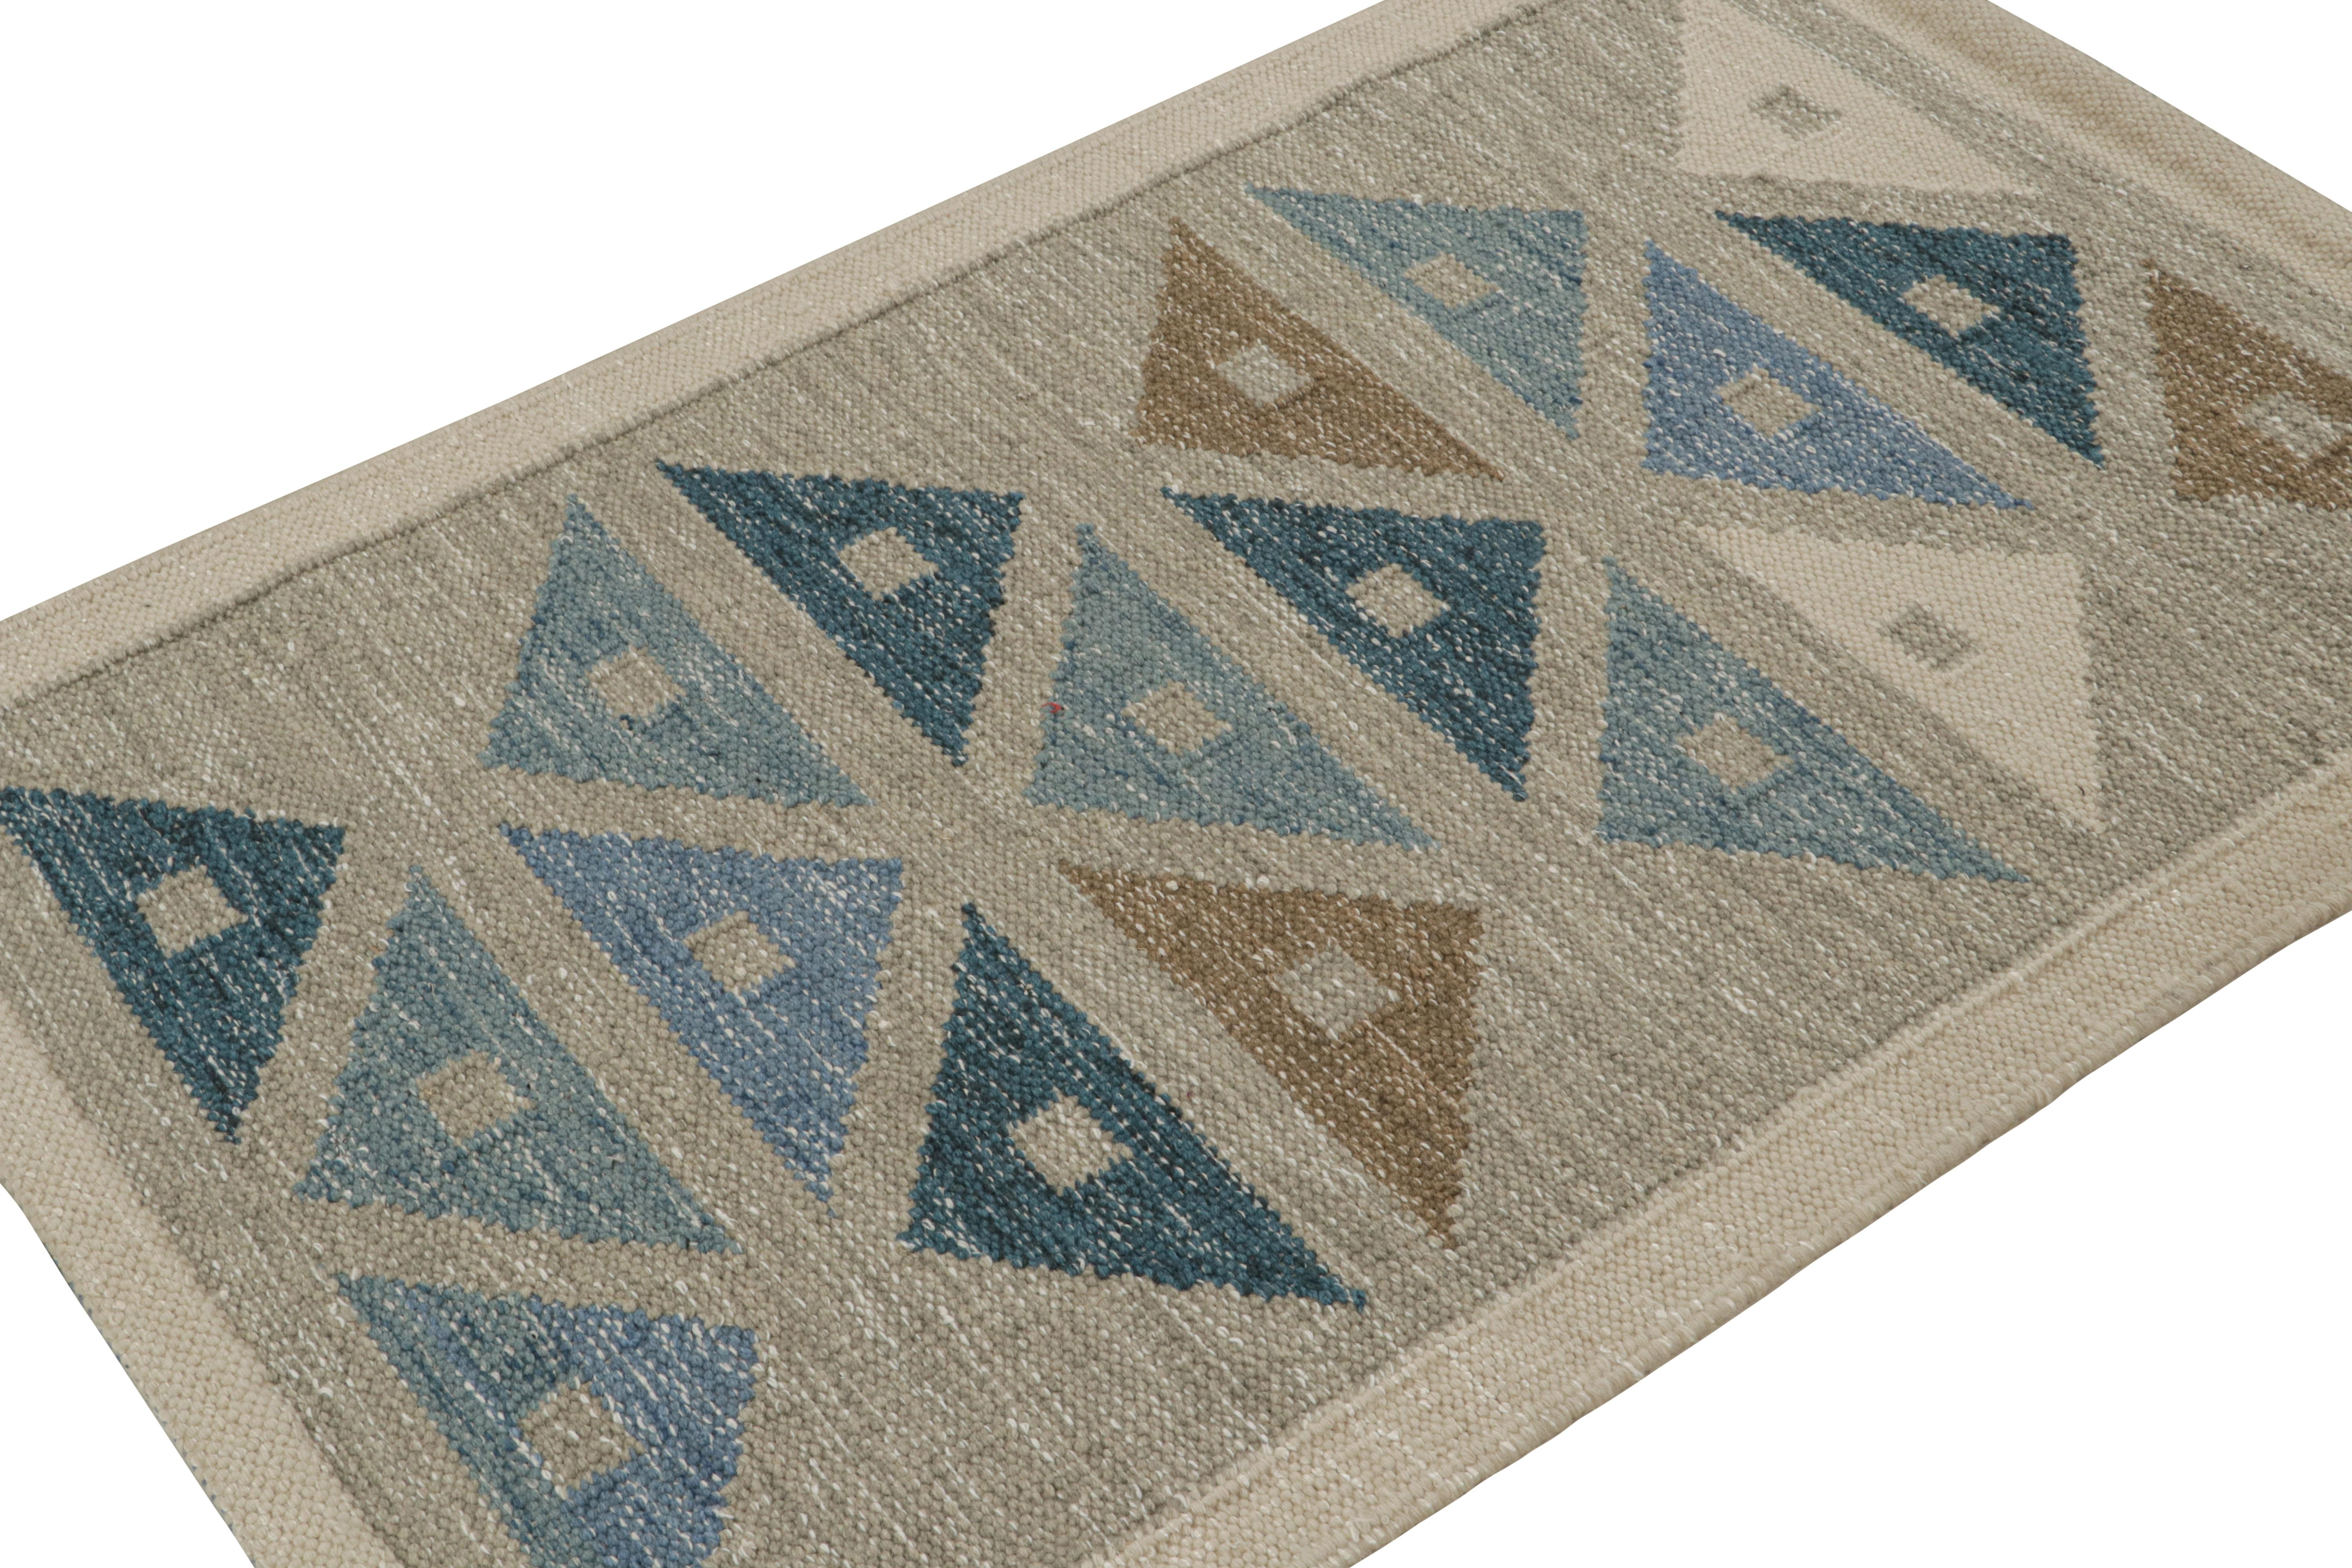 This 3x5 custom Kilim rug is from the flatweave line in the Scandinavian rug collection by Rug & Kilim. Handwoven in wool, cotton and natural yarns, its design is a modern take on Rollakan and Rya rugs in the Swedish Deco style. 

On the Design: